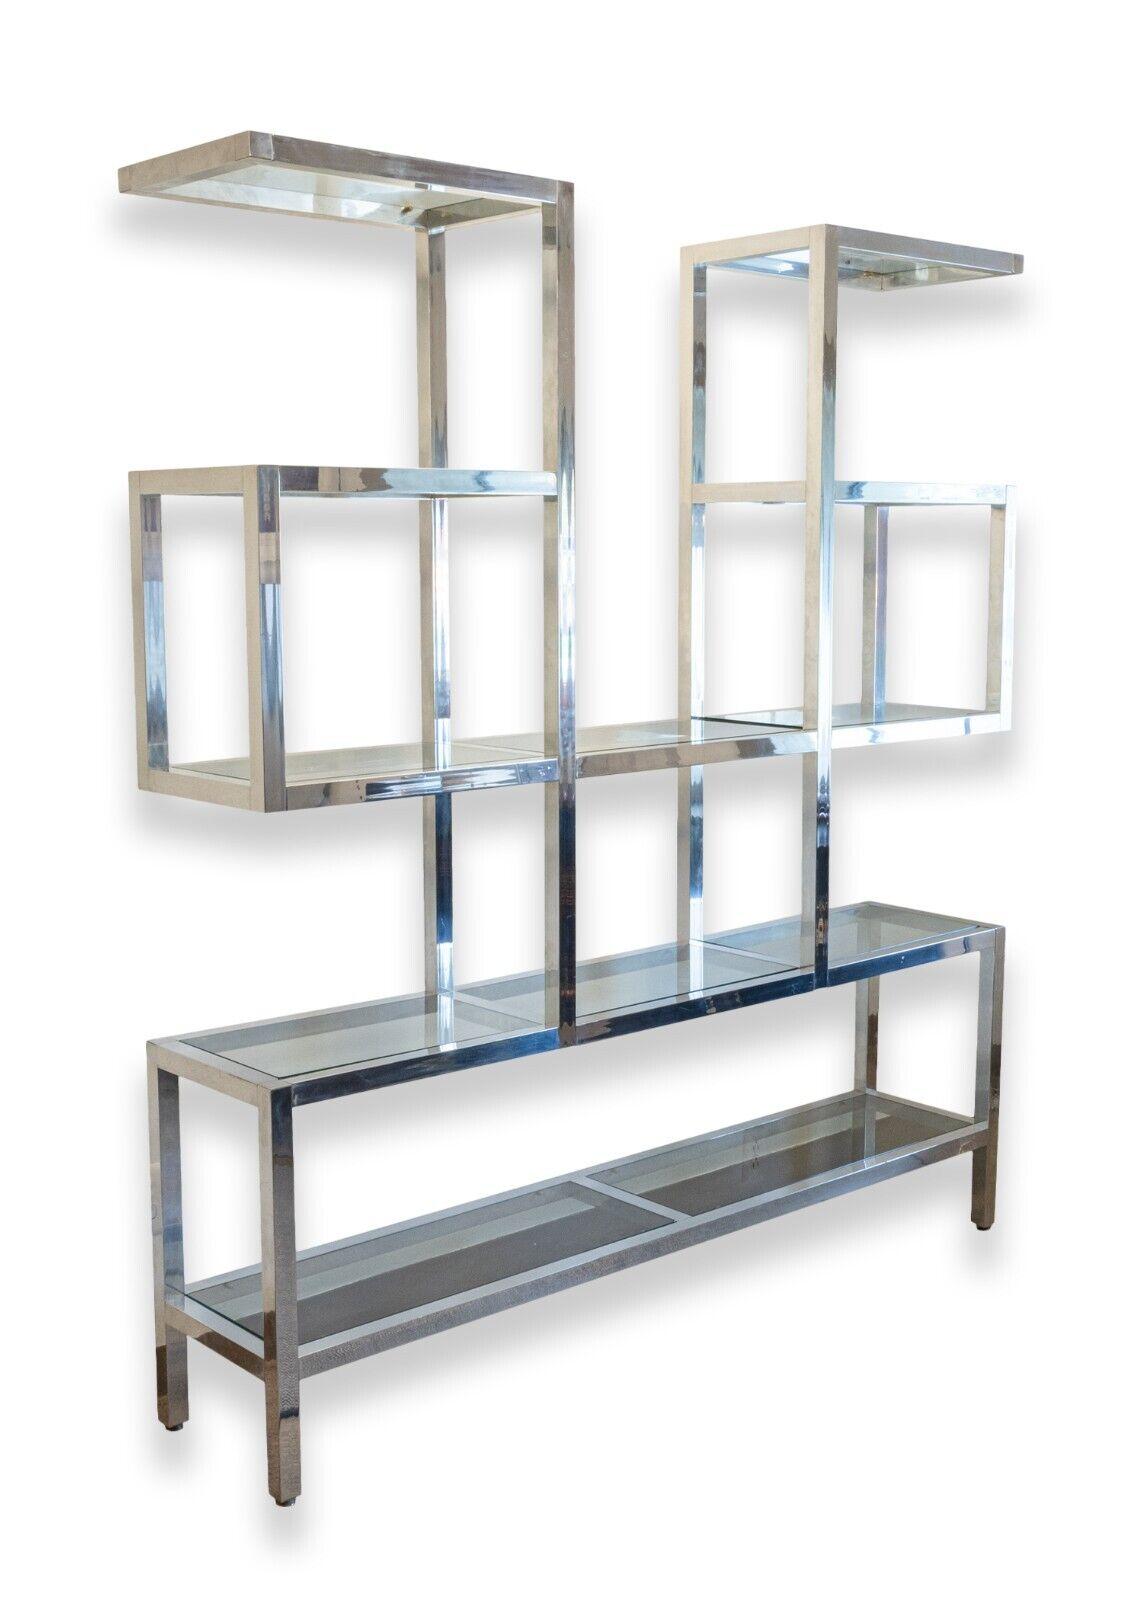 Elevate your home decor with this stunning Milo Baughman Style Large Chrome and Glass Floating Etagere Shelving Wall Unit. Crafted from high-quality glass and chrome finished metal, this contemporary/modern style shelving unit is a perfect addition